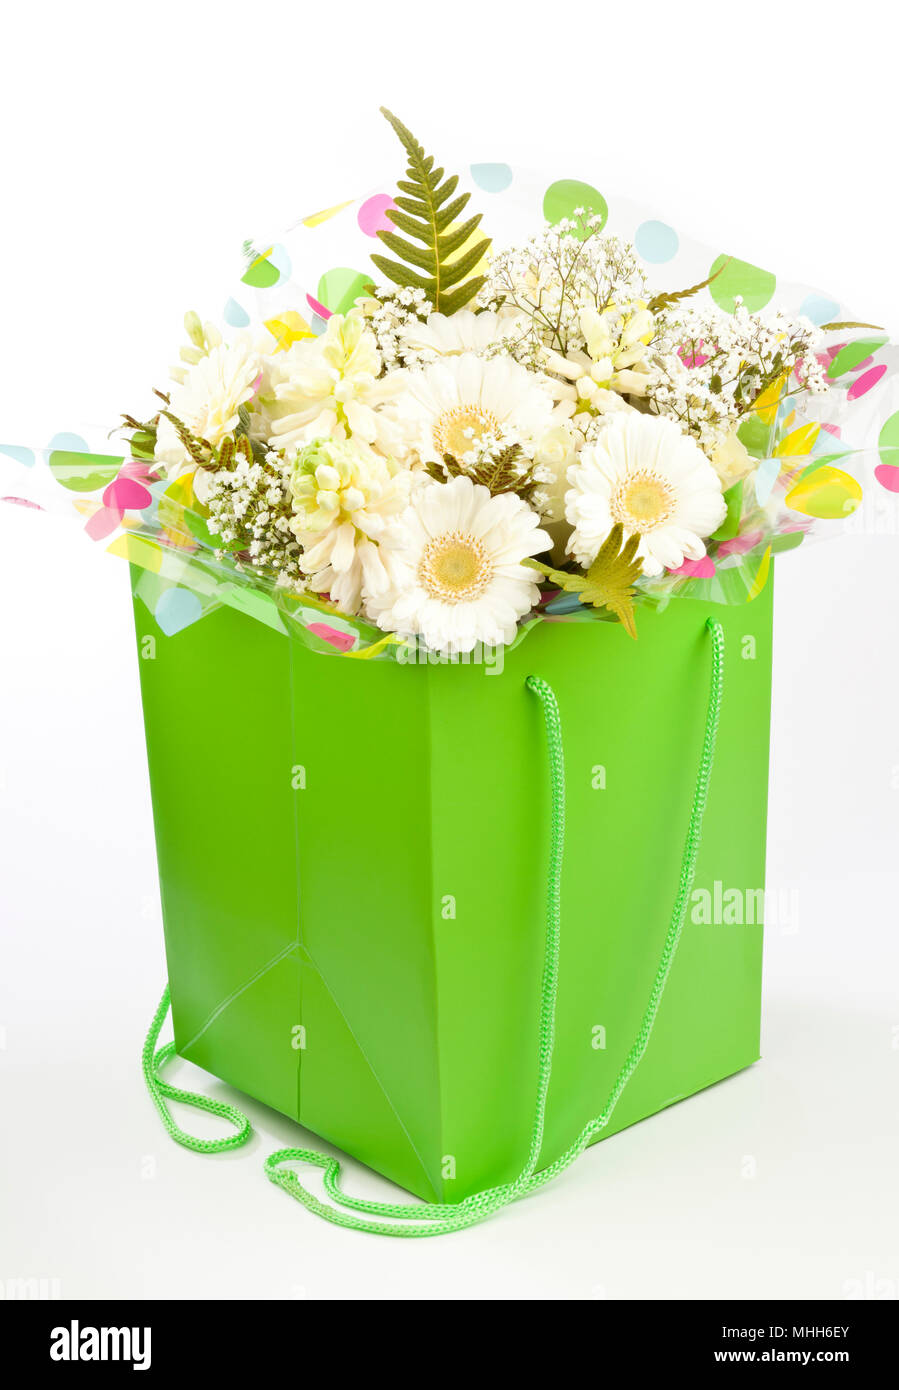 A lime green bag filled with cream coloured flowers Stock Photo